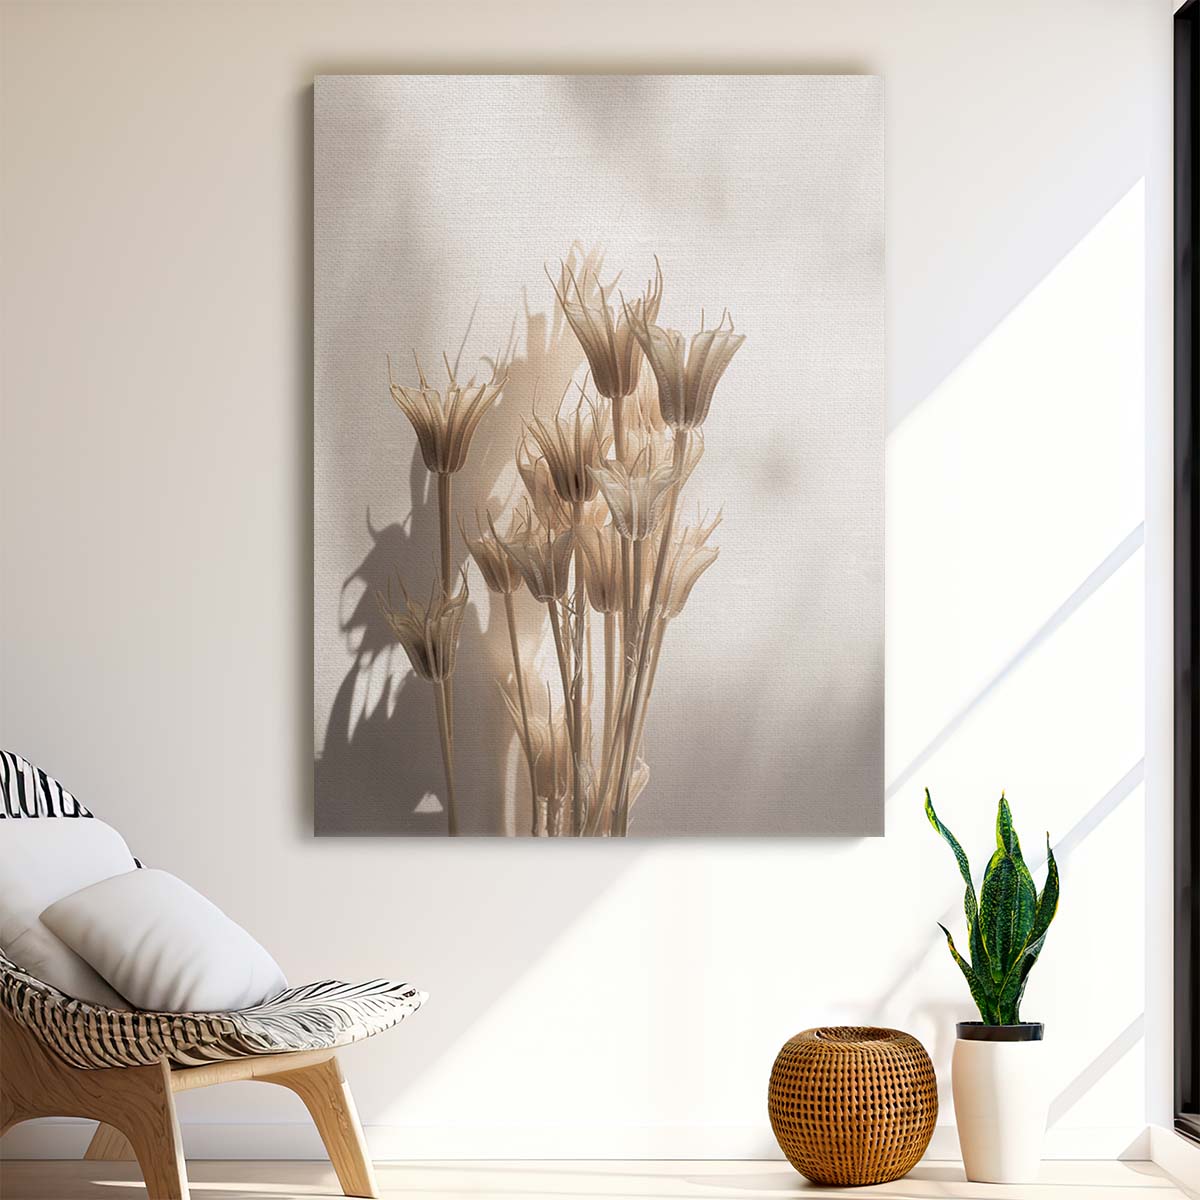 Beige Boho Floral Macro Photography Art, Mareike Bohmer by Luxuriance Designs, made in USA